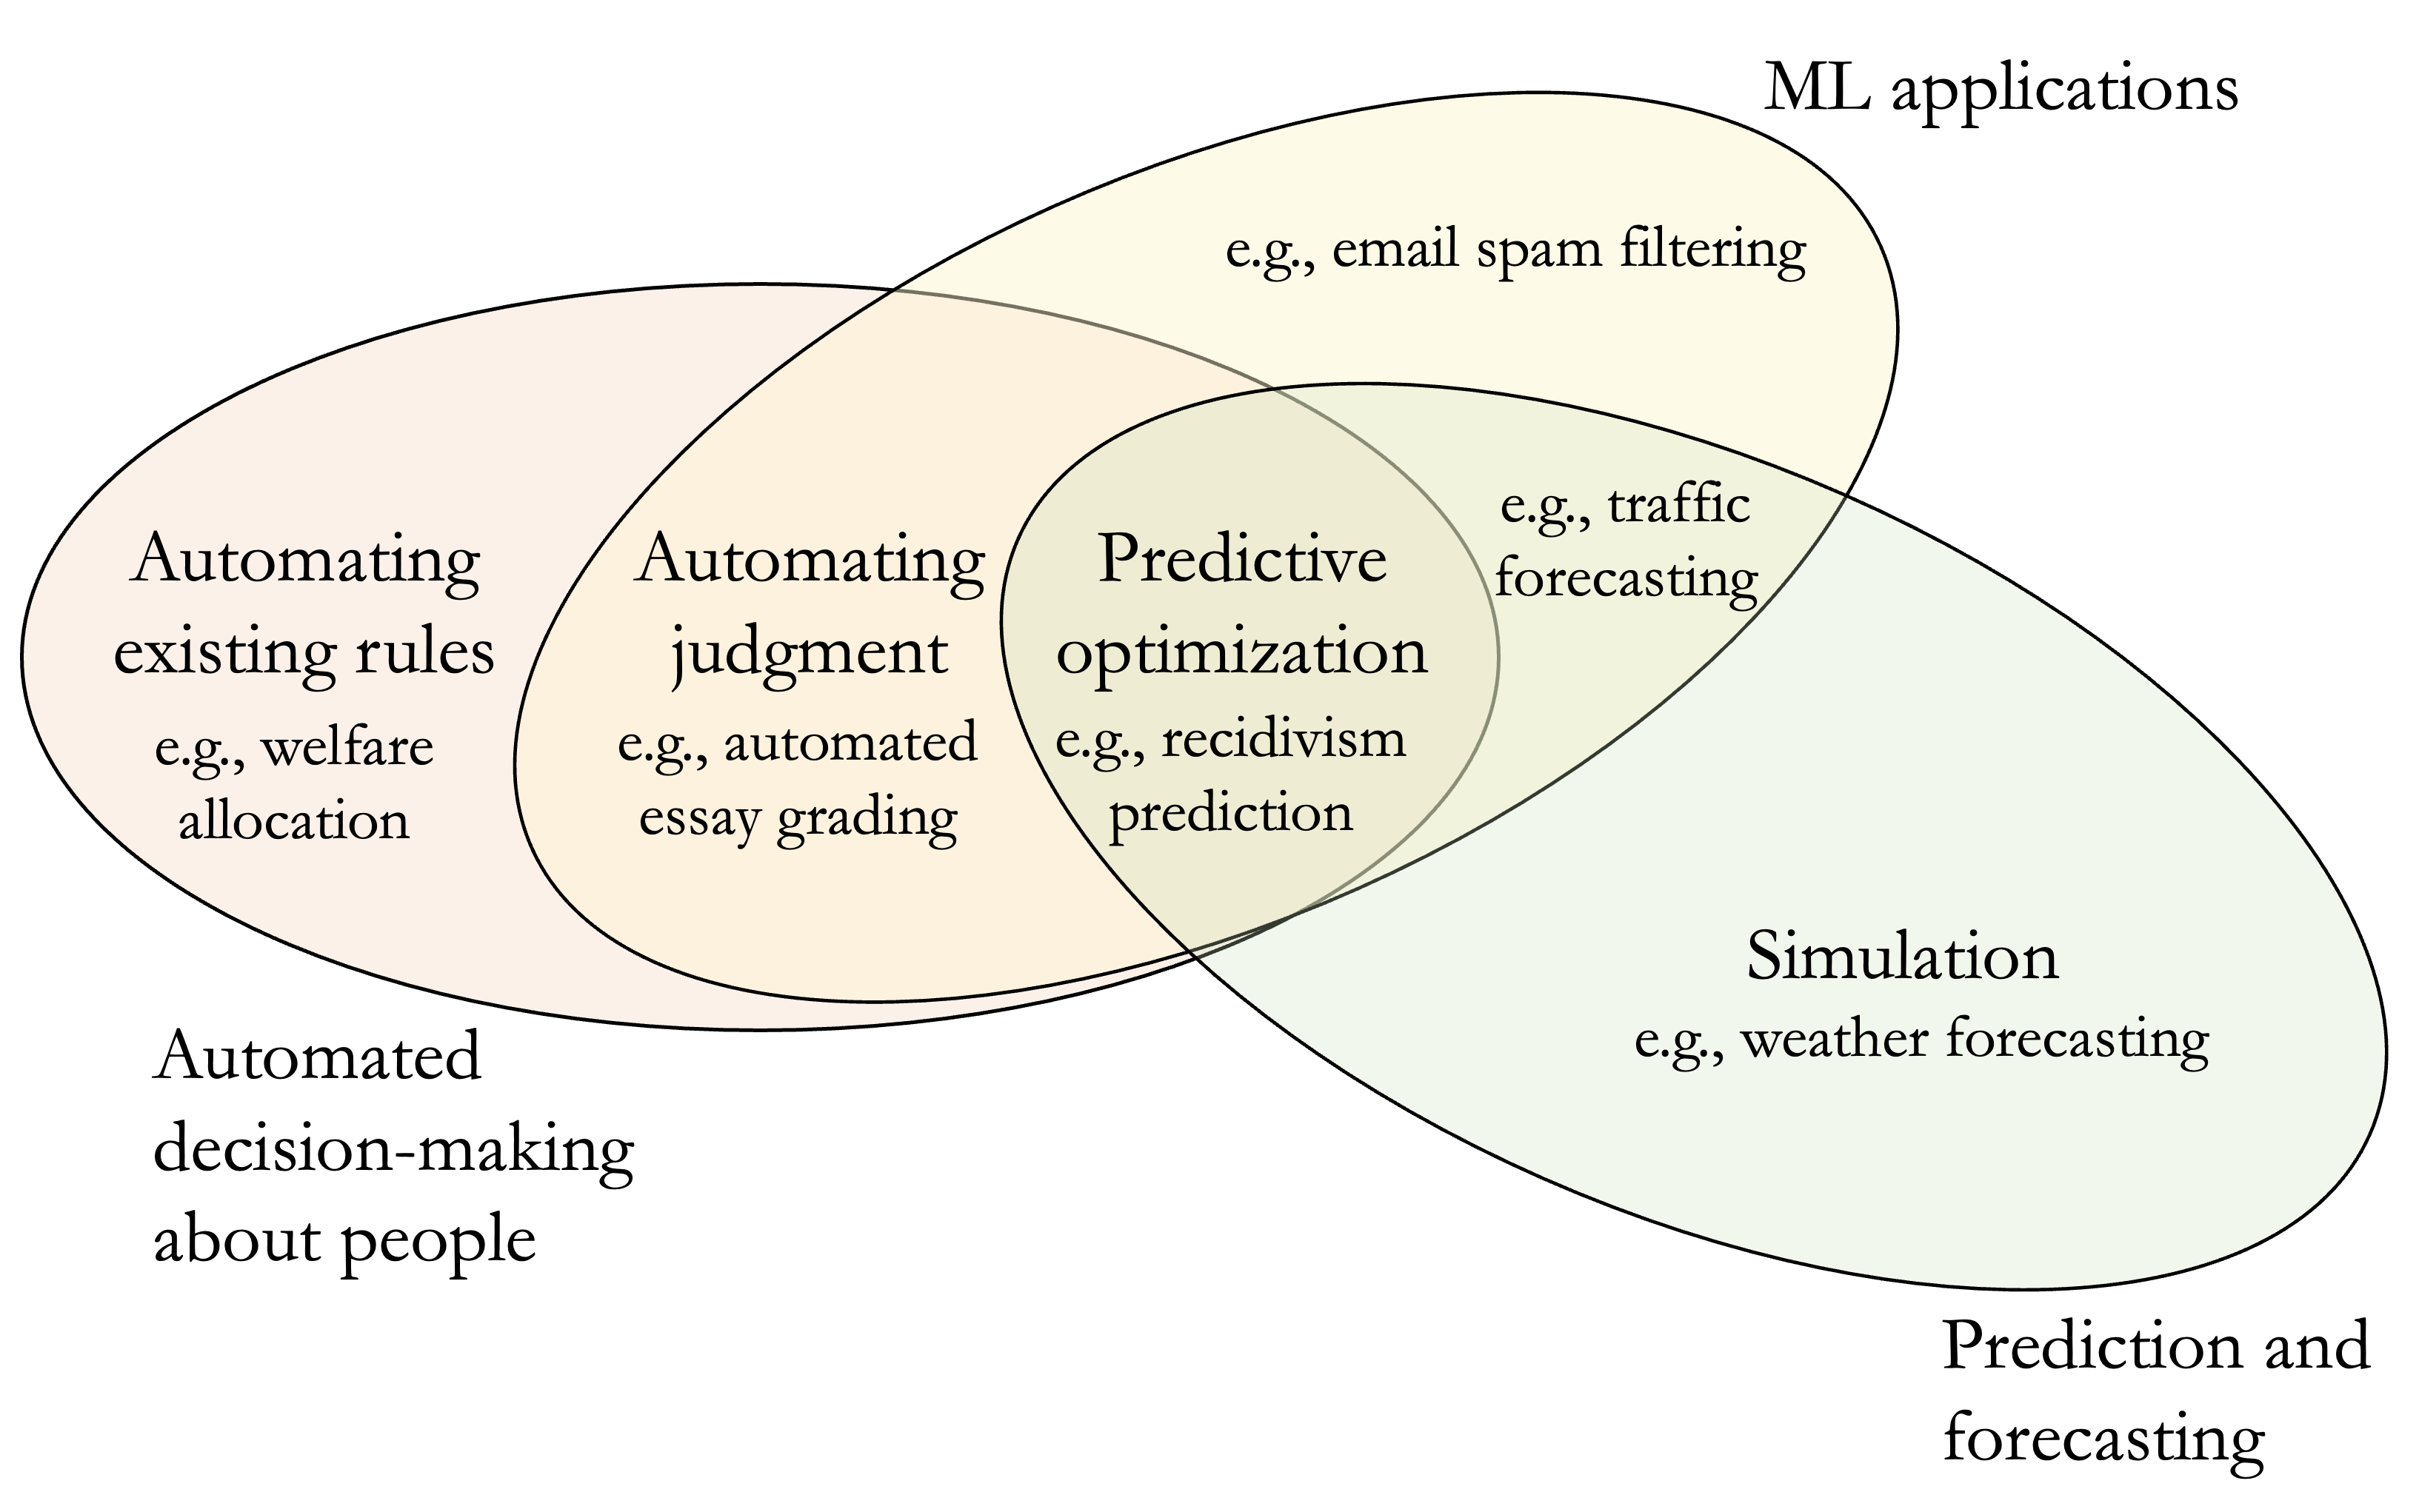 Venn diagram showing three criteria of ML applications, automated decision-making about people, and prediction and forecasting. Predictive optimization lies at the intersection.